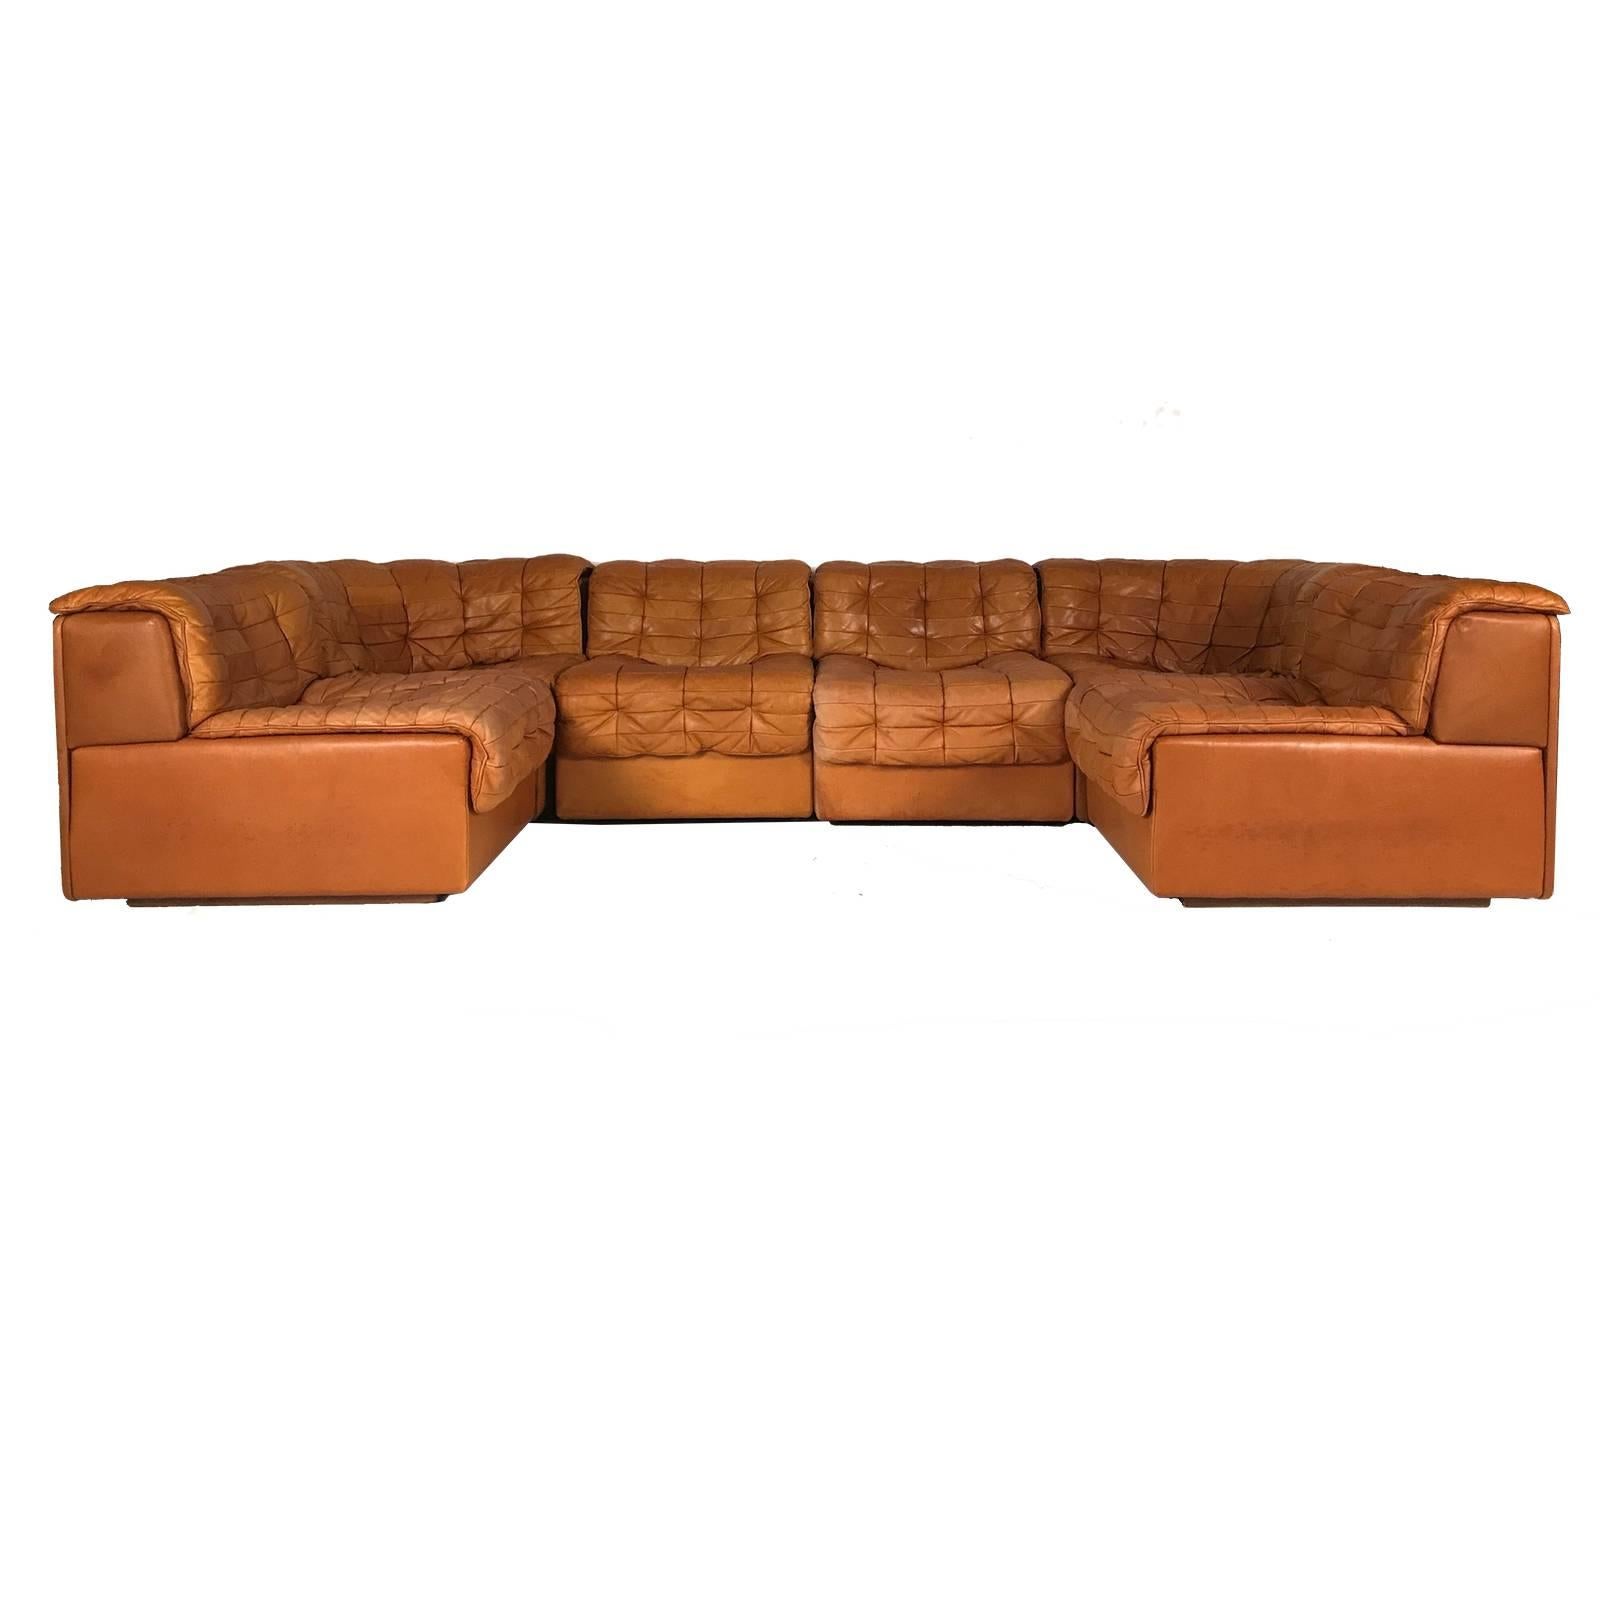 Six piece sectional set consisting of four armless pieces, and two pieces that can function as end or corner pieces. One is designed as a corner piece and one as an end. See photos.
Four pieces of model: DS11 - each piece measures: 25.5" W x